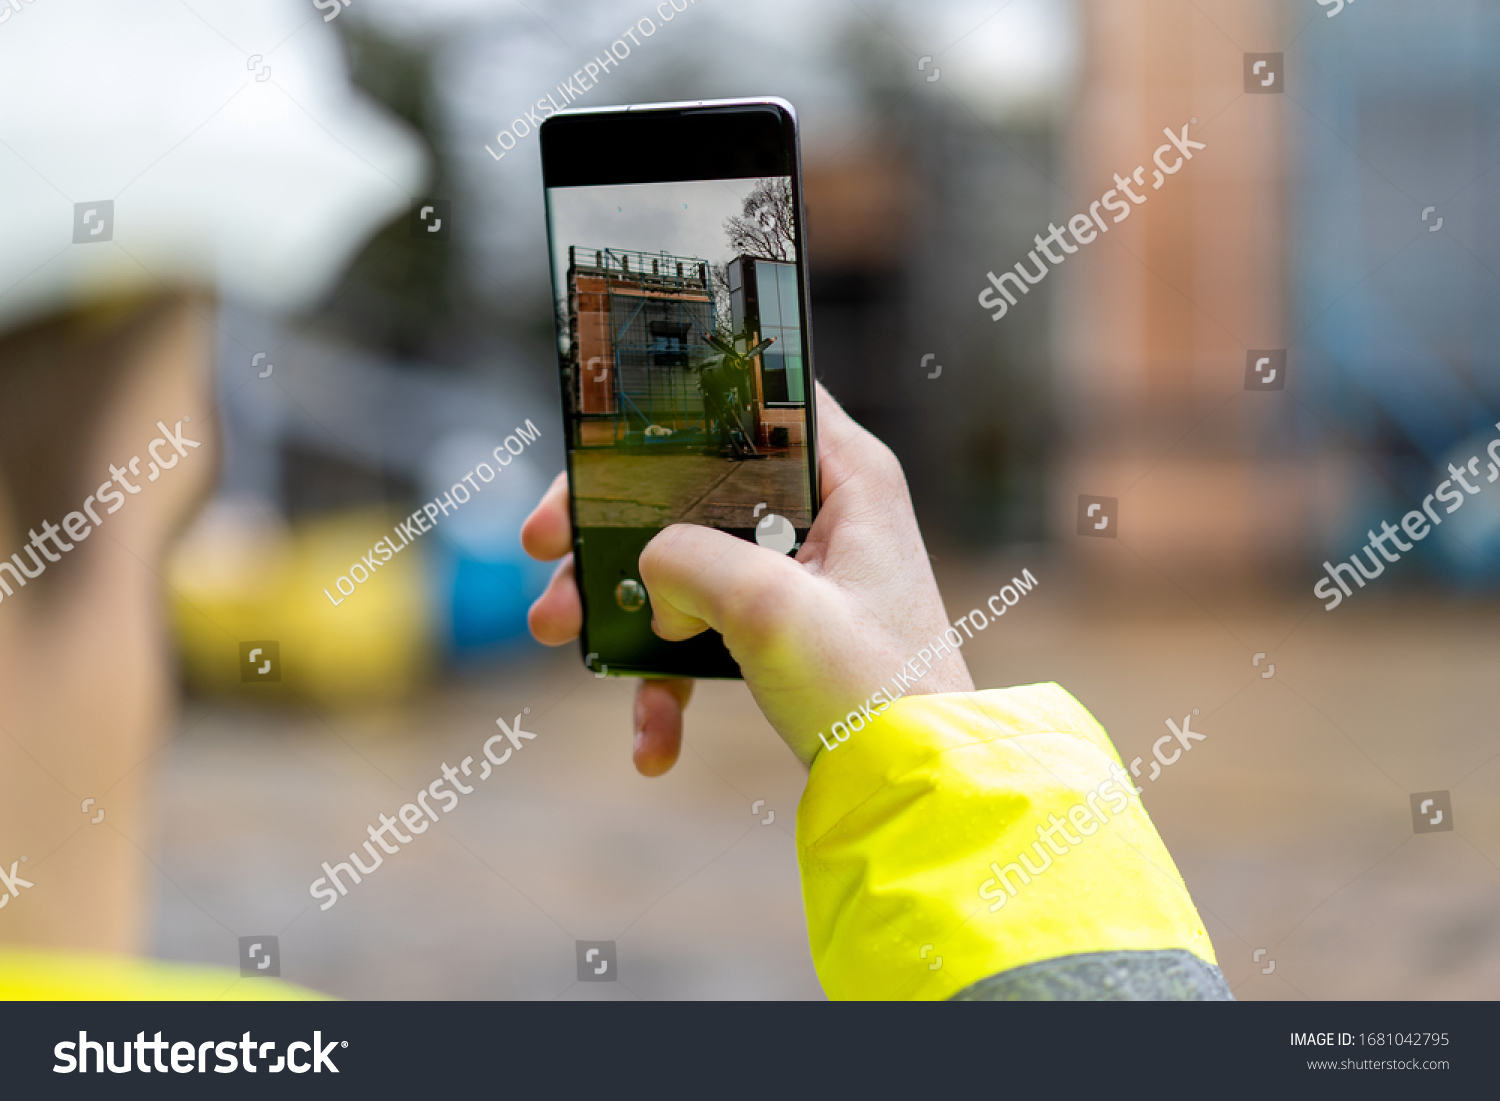 Architect holding a smartphone on construction site. young construction worker is using mobile phone on site. Construction worker with building plans and cellphone. Focus on mobile. warm vivid filter. #1681042795